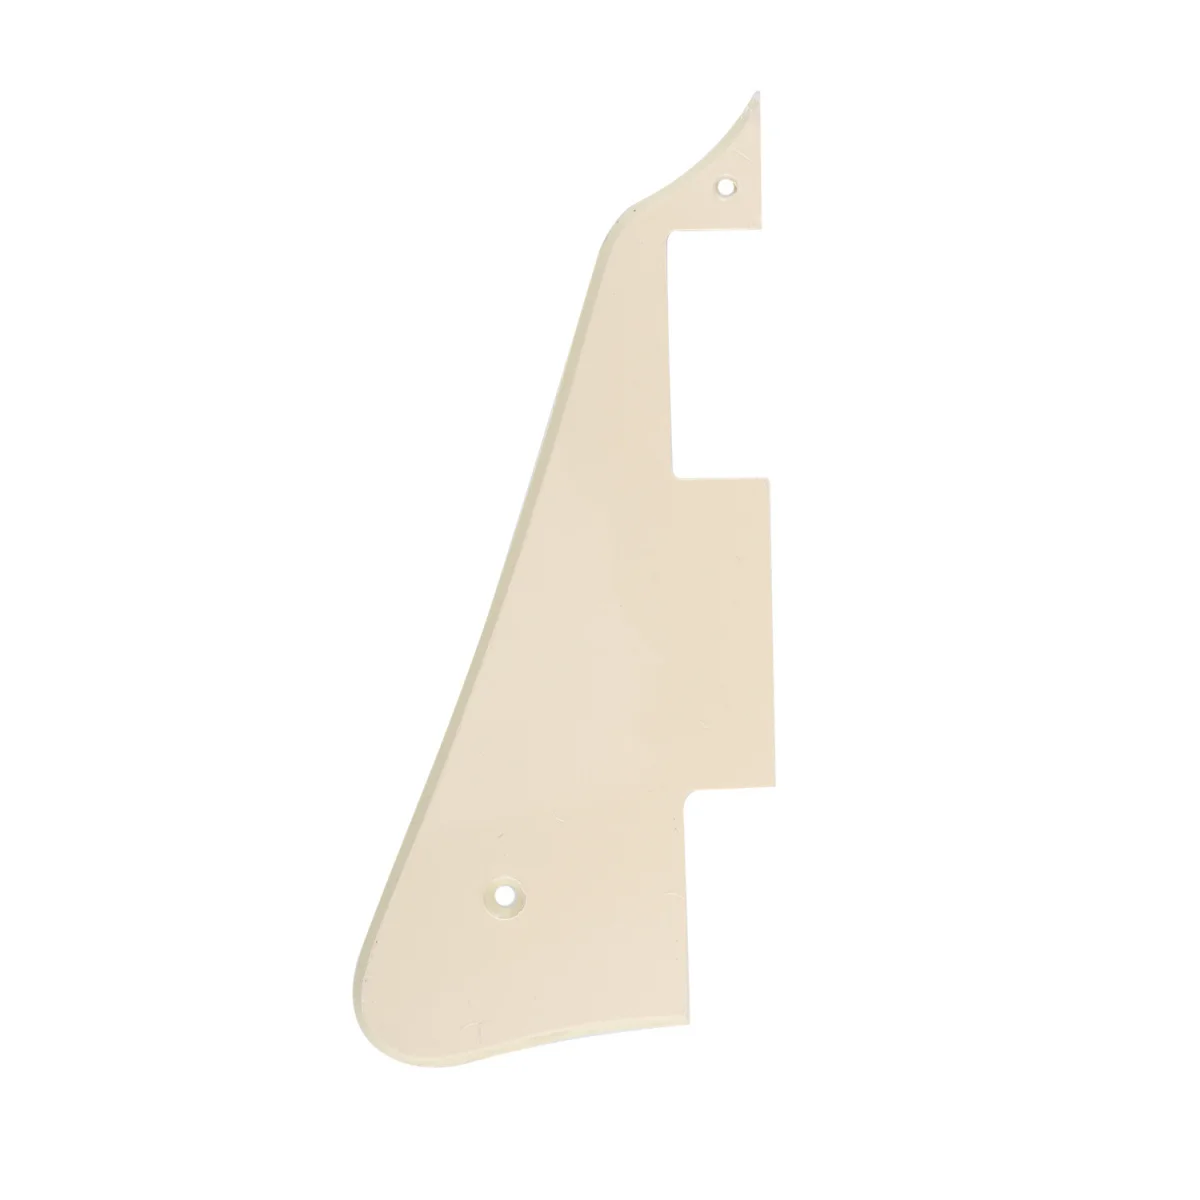 

Musiclily Pro Left Handed Plastic Guitar Pickguard for 2006-Present Modern Style Epiphone Les Paul Guitar, 1Ply Cream